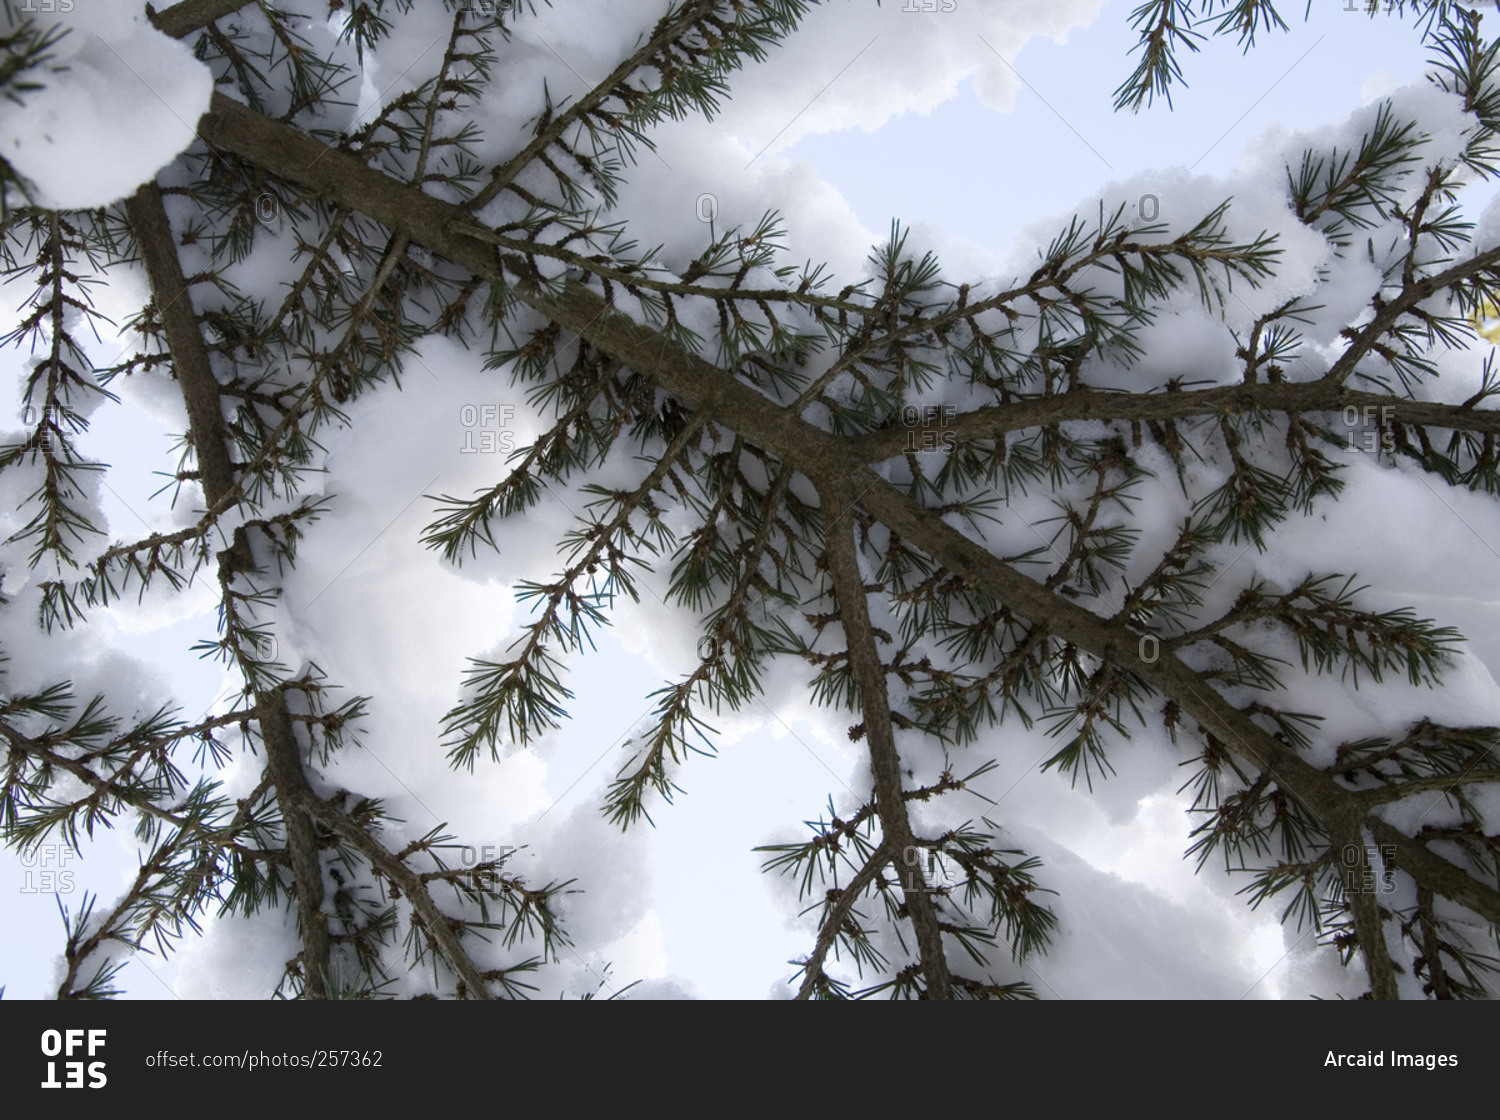 Low angle view of tree branches covered in snow